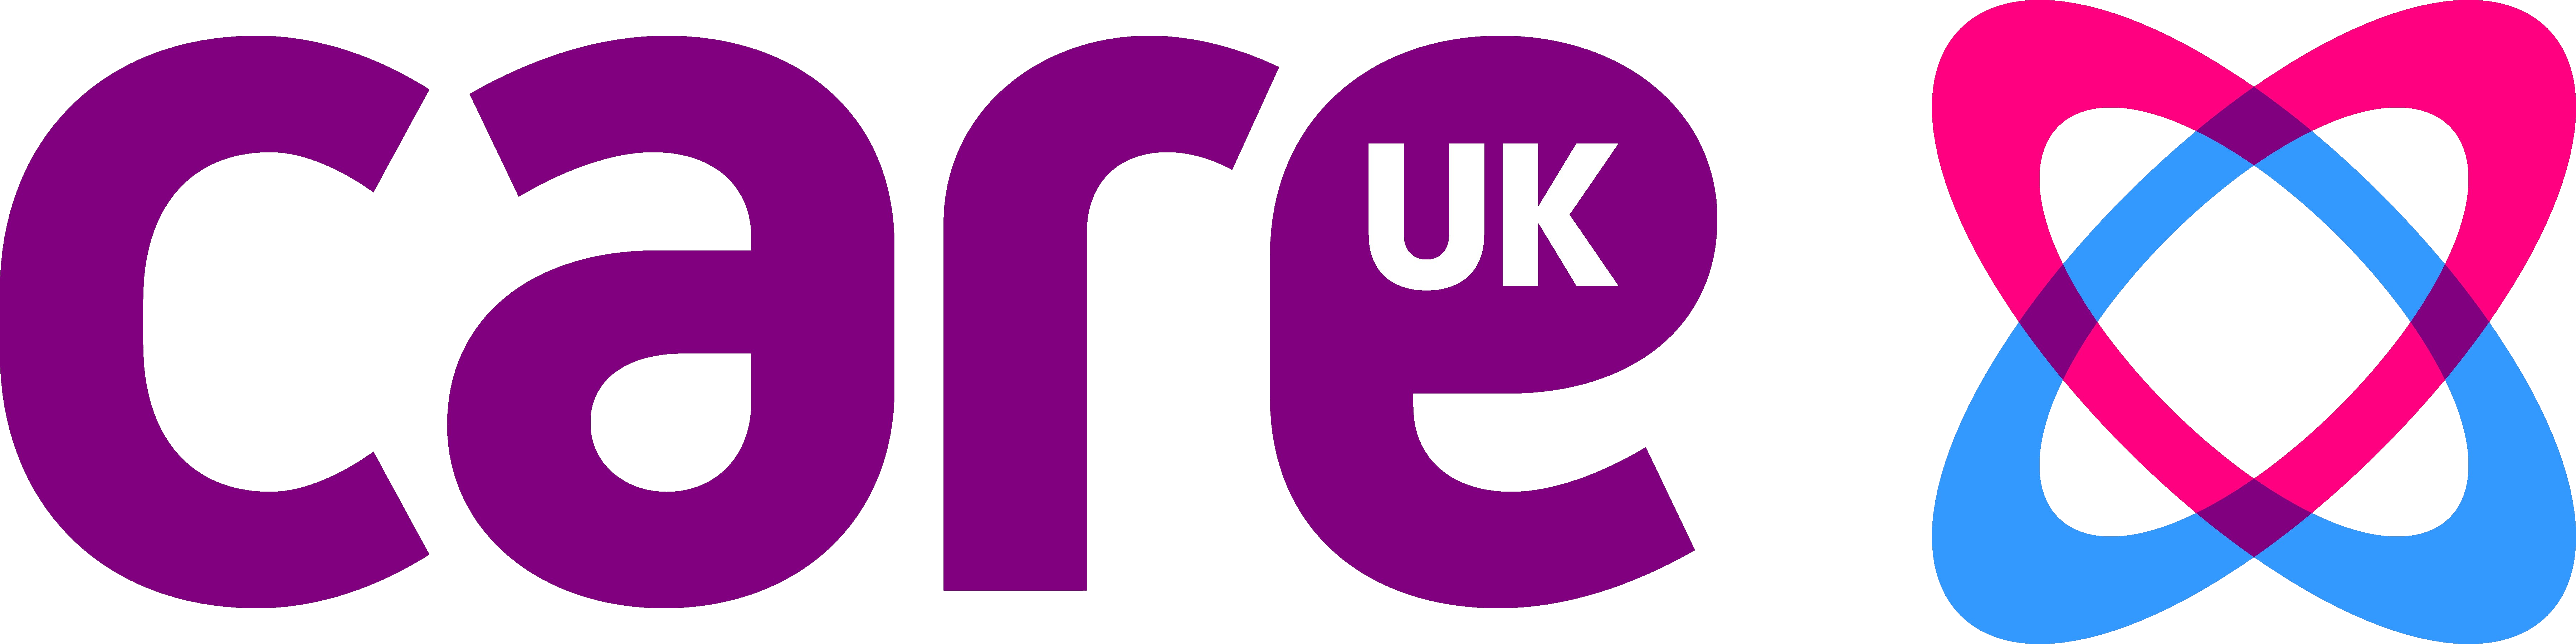 Care Uk - Care Uk Care Homes (7200x1800), Png Download